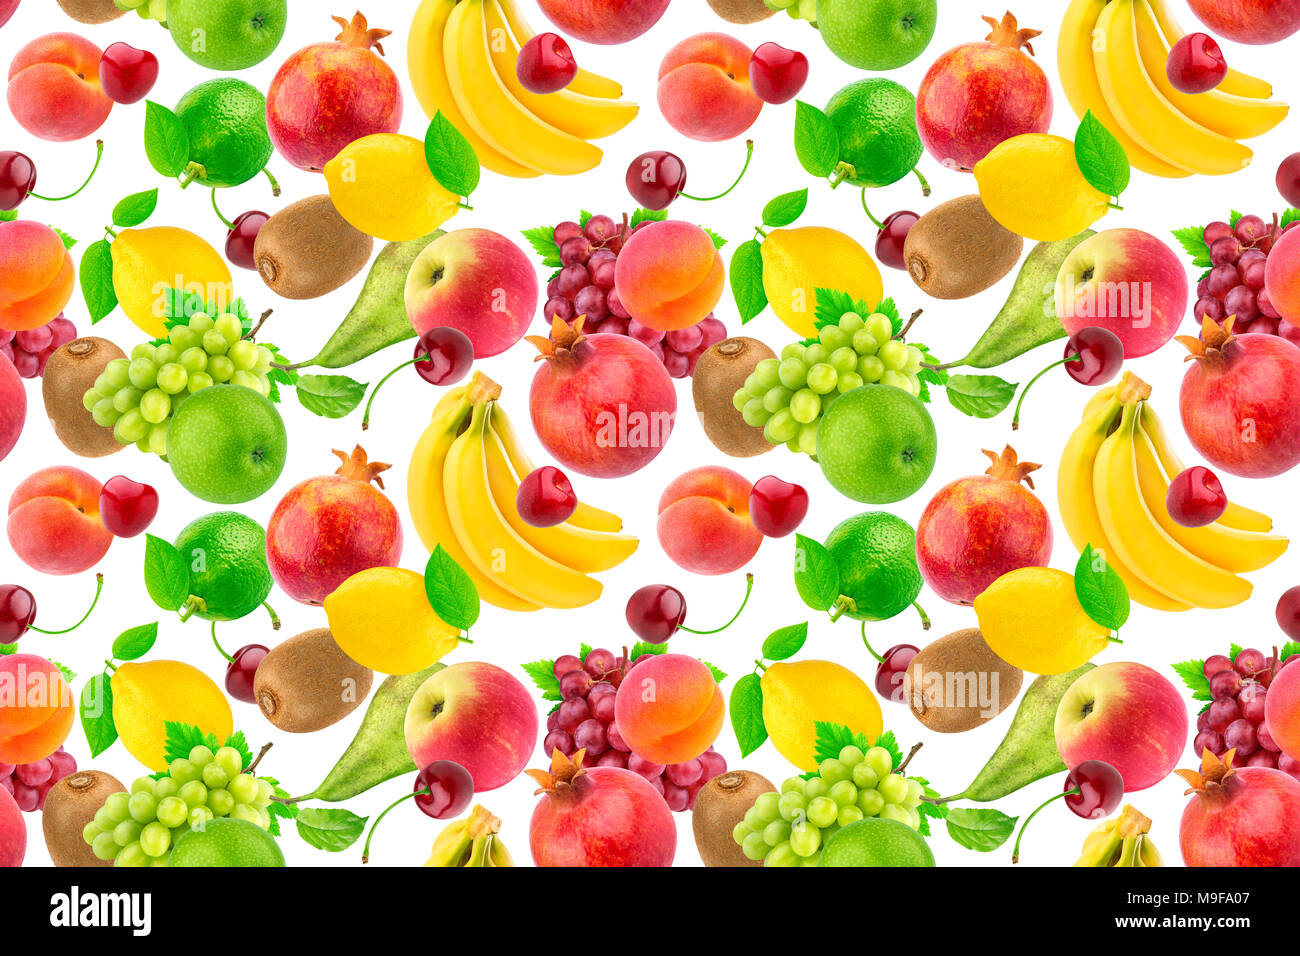 Seamless pattern of different fruits and berries. Flying tropical fruits isolated on white background Stock Photo